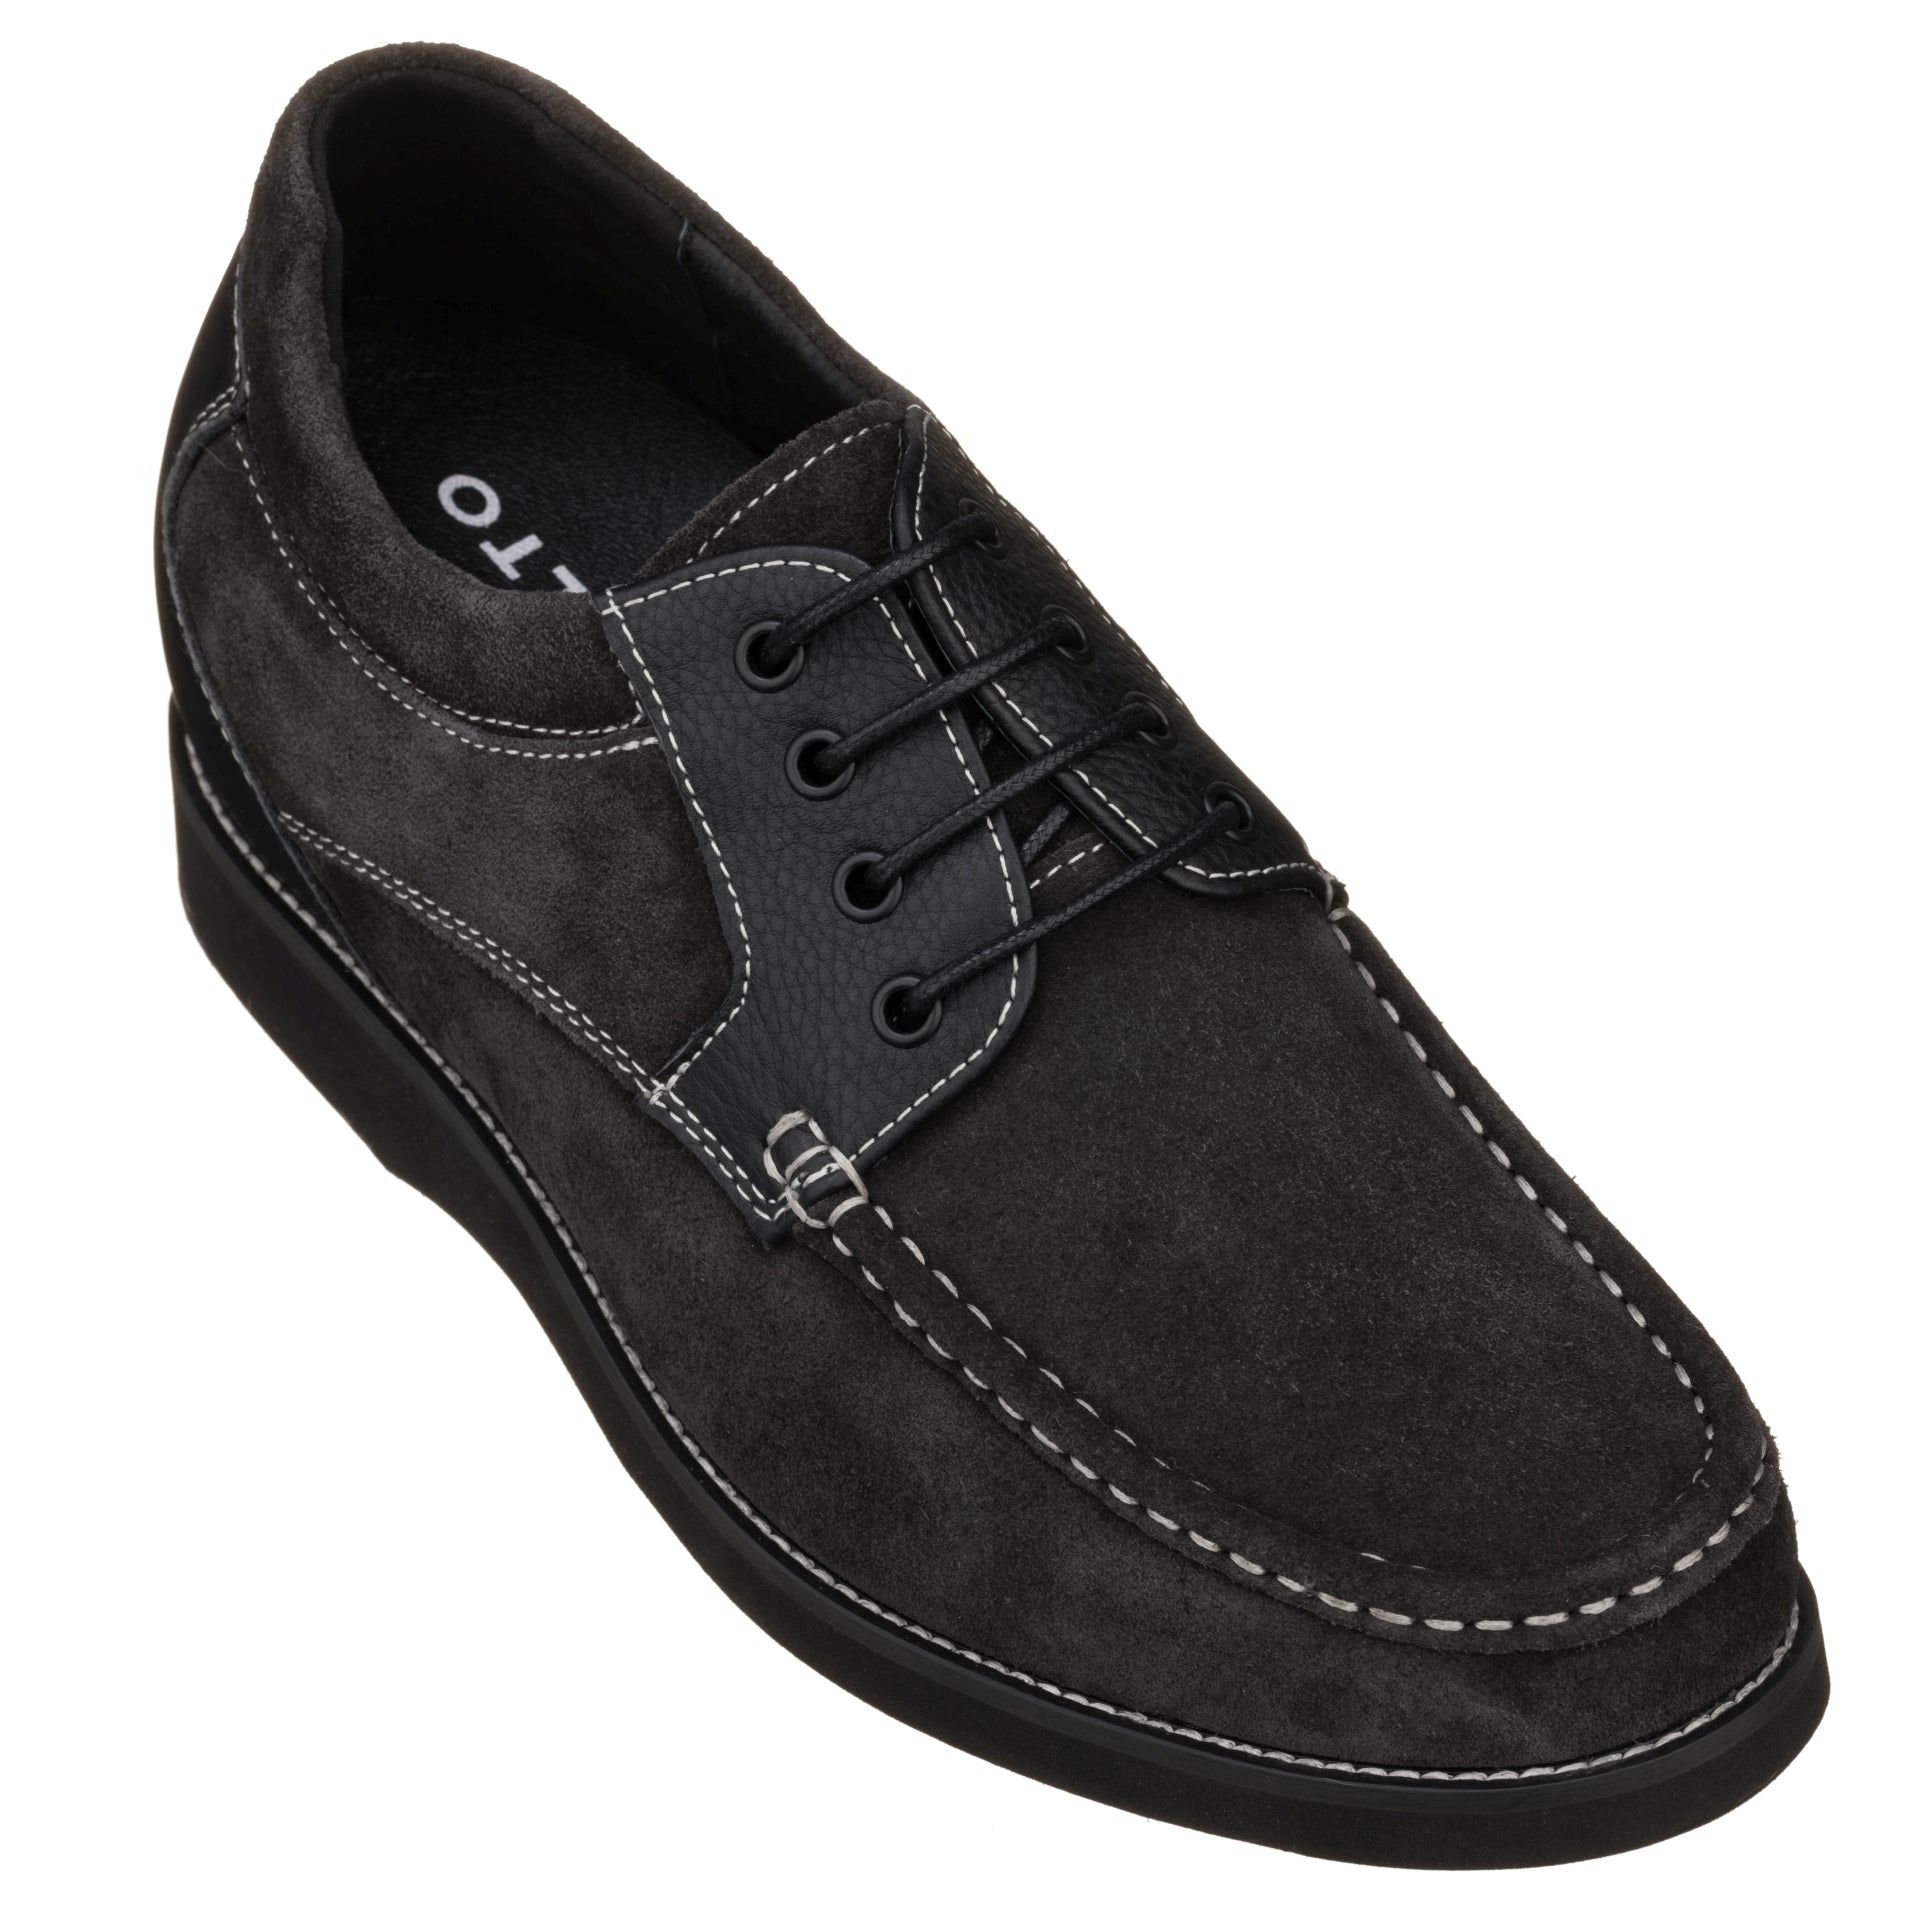 Elevator shoes height increase CALTO - YH9537 - 3.0 Inches (Black) - Casual Leather Shoes